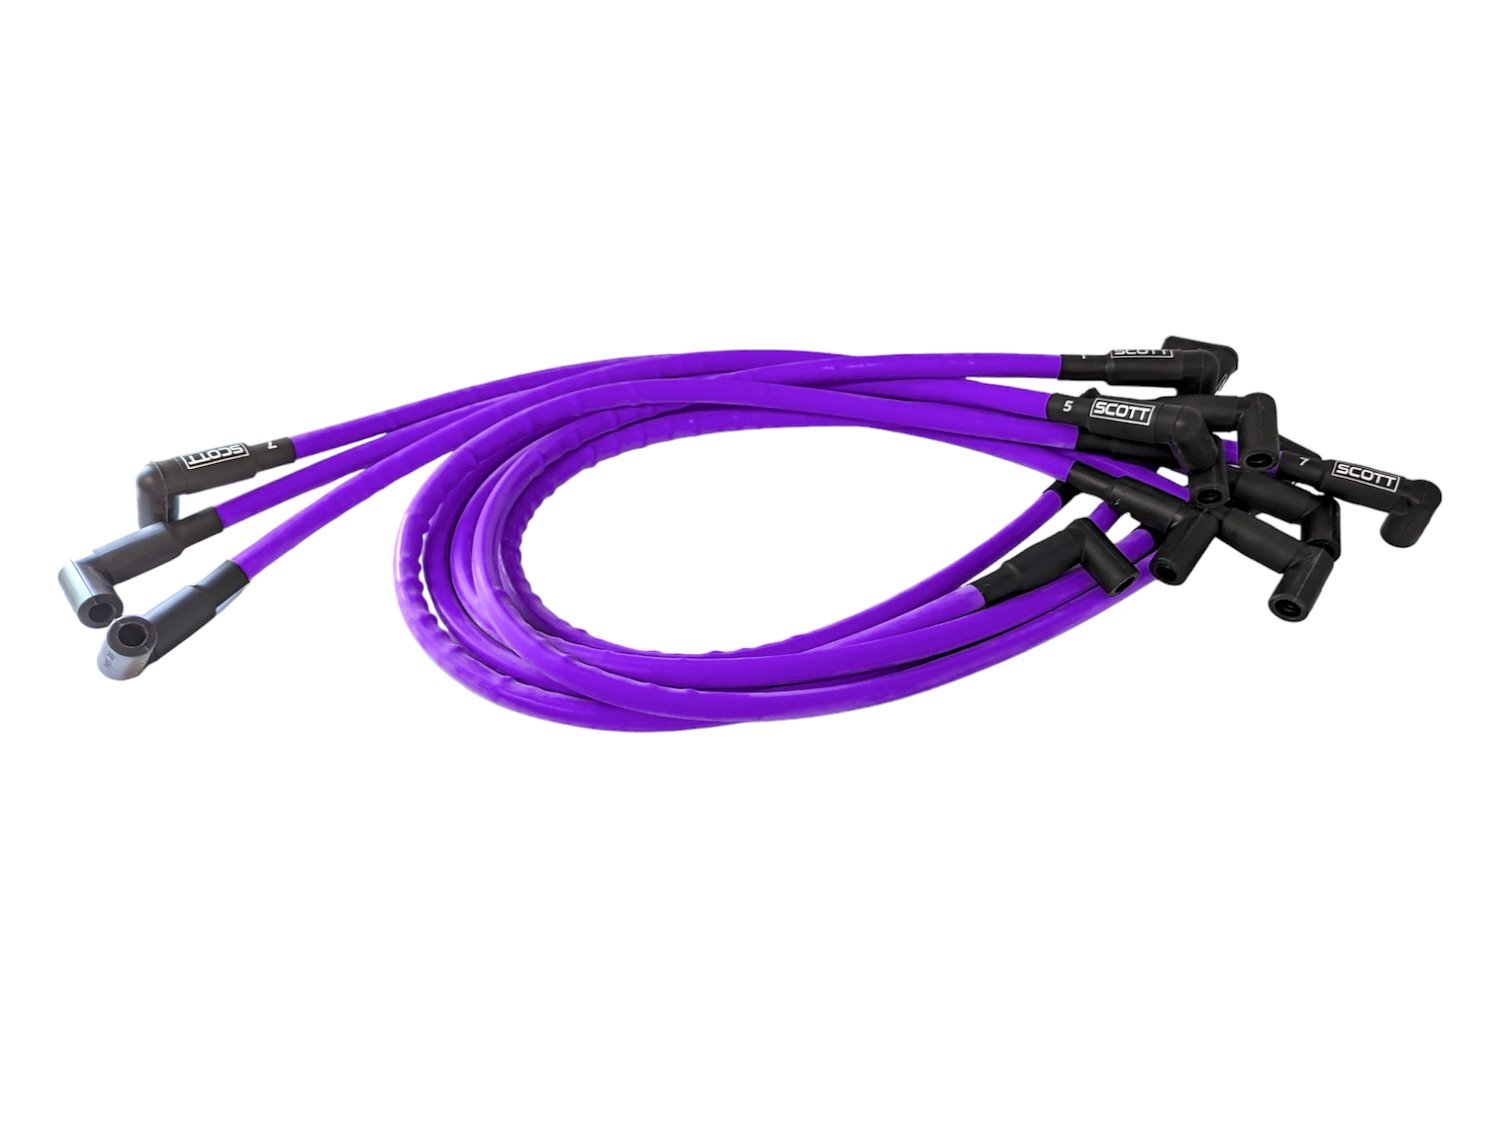 SPW-CH-402-6 High-Performance Silicone-Sleeved Spark Plug Wire Set for Small Block Chevy, Over Valve Cover [Purple]